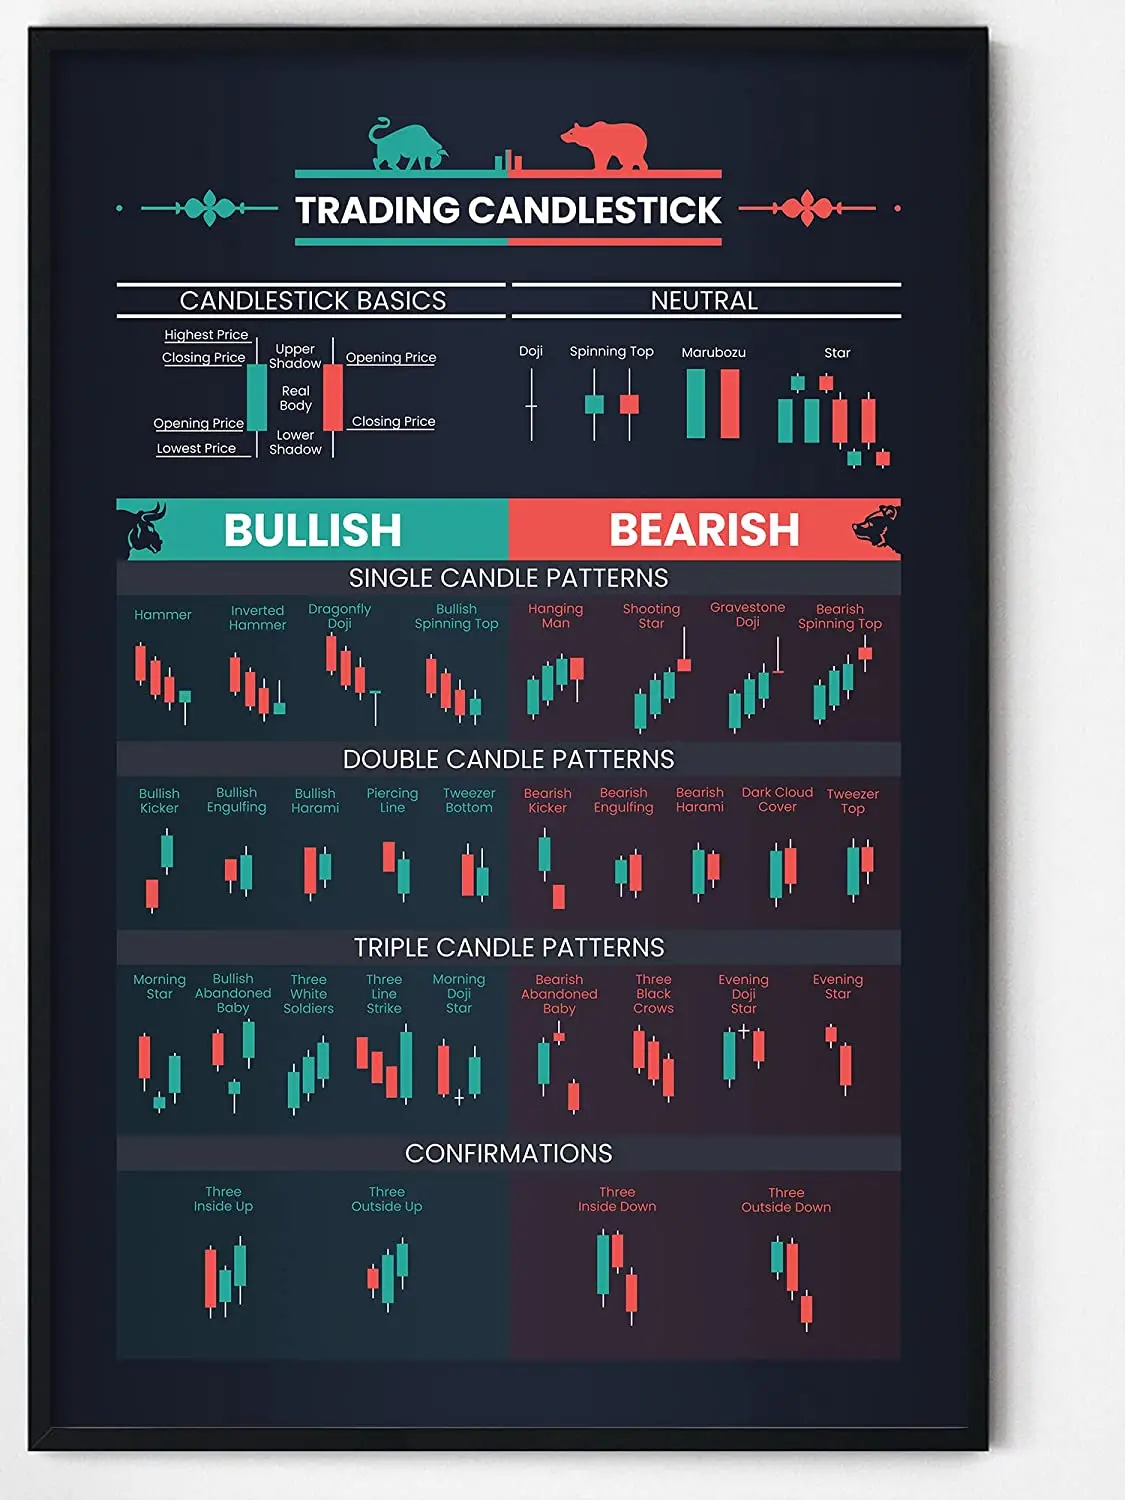 

Stock Market Forex Trading Charts - Wall Street Artwork Home Office Decor tin sign Candlestick Pattern Poster for Trader -